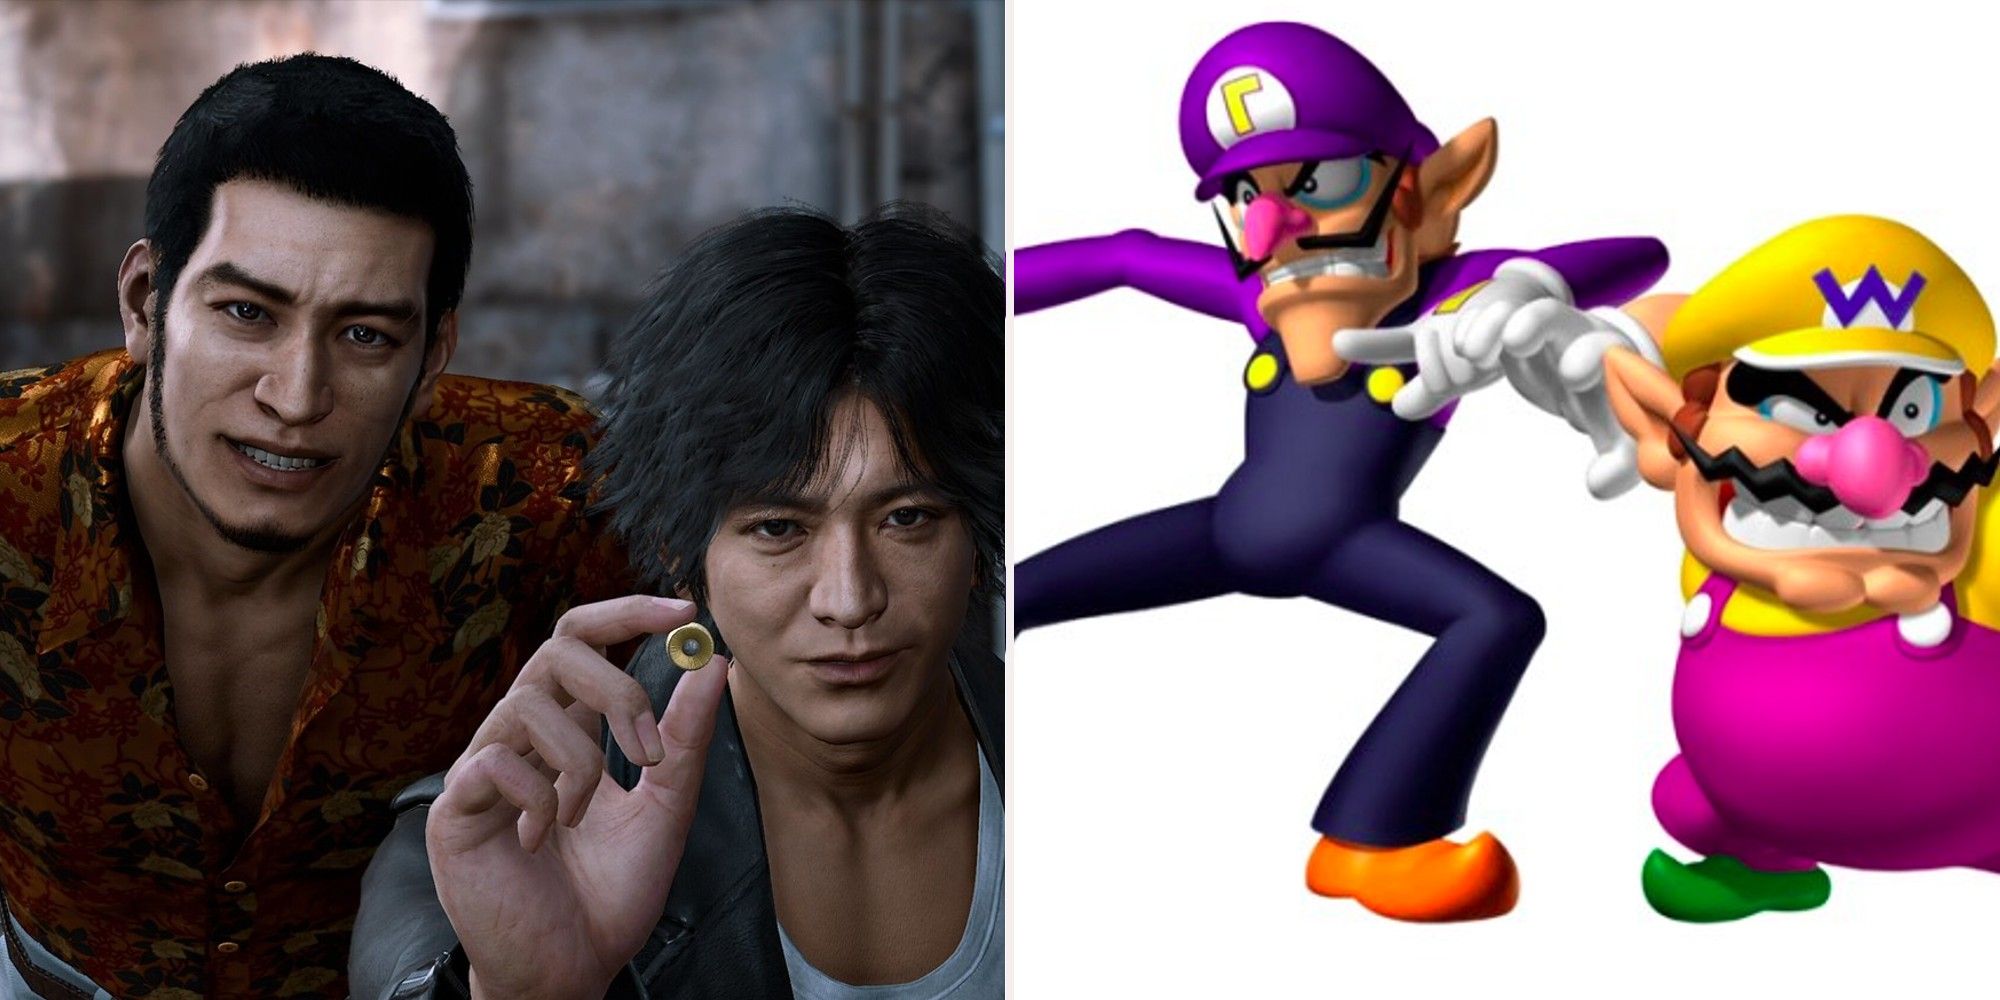 Best Bromances Feautred Image - Tak and Yagami in Judgment and Waluigi and Wario from Mario Bros